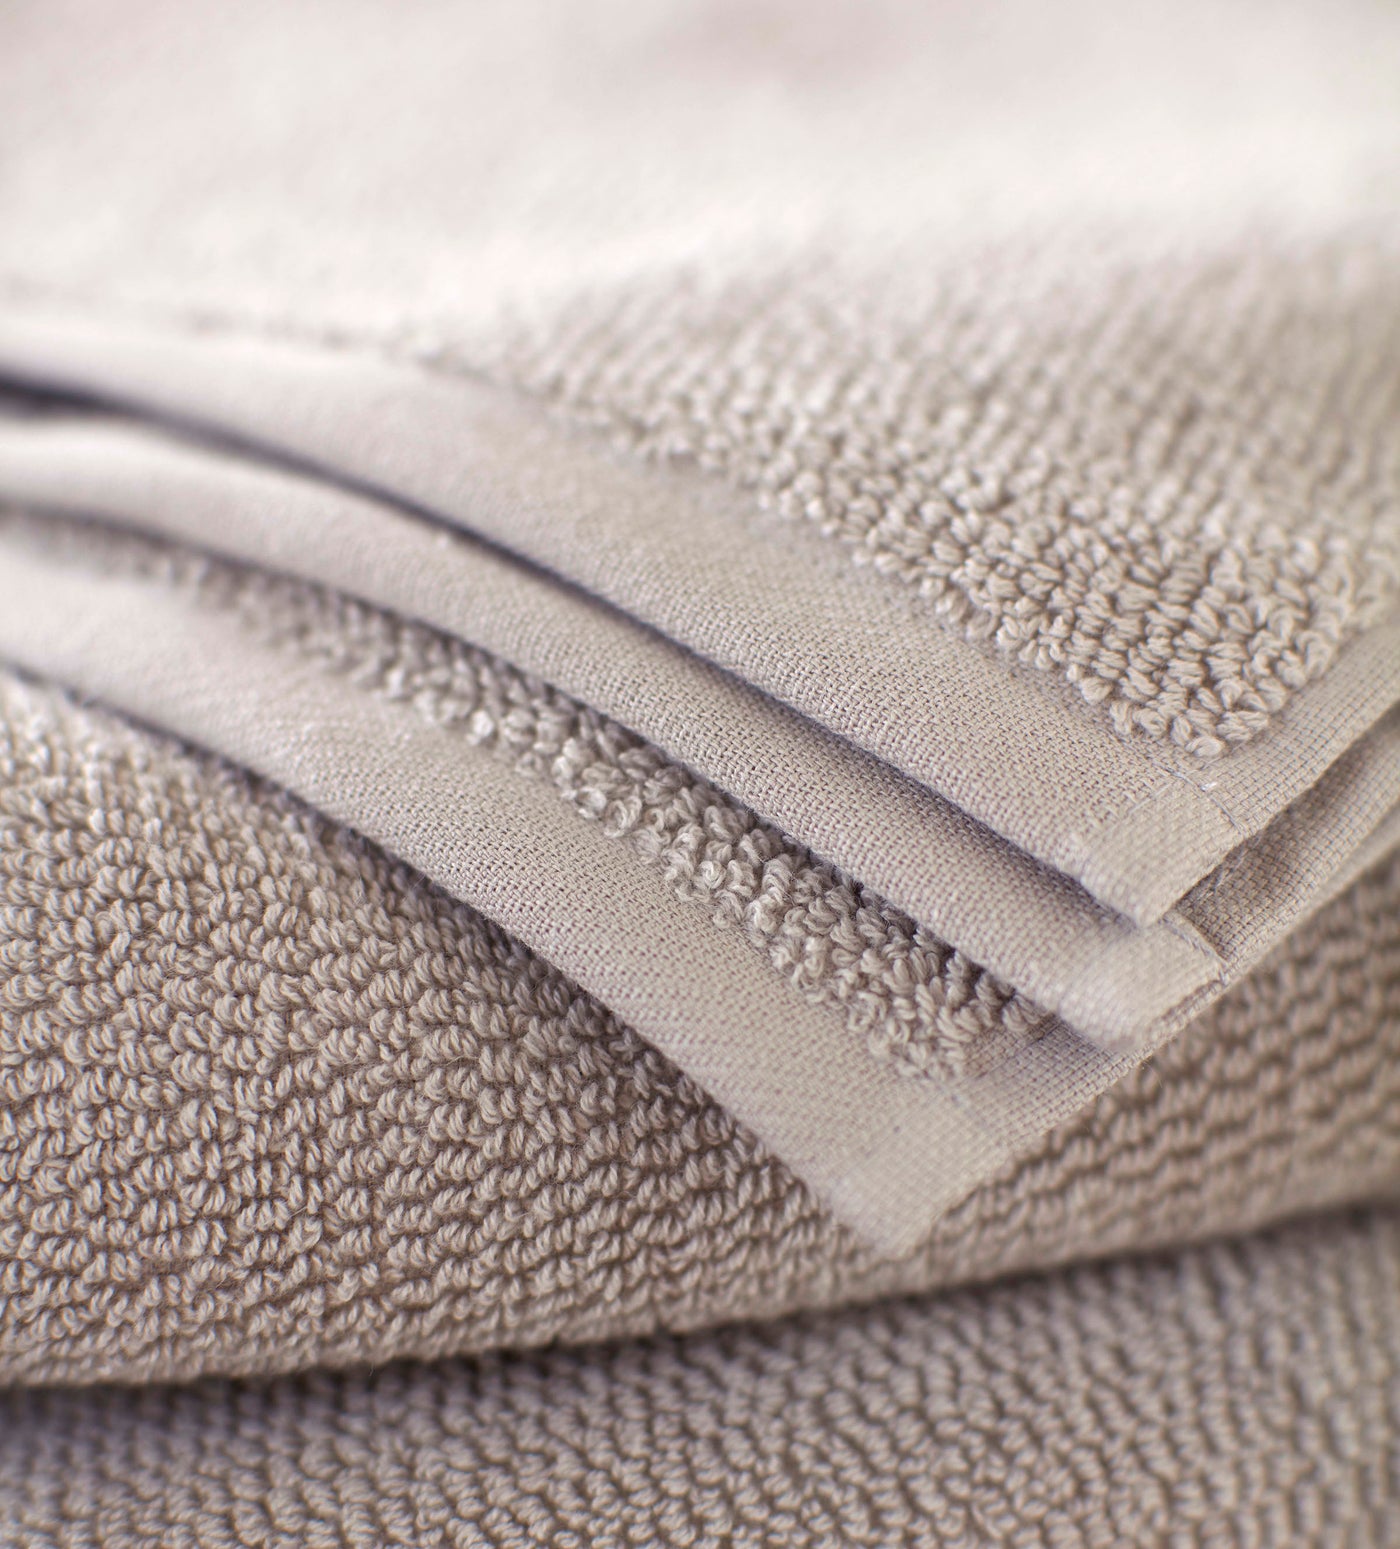 Dove Grey 100% Cotton Hand Towels